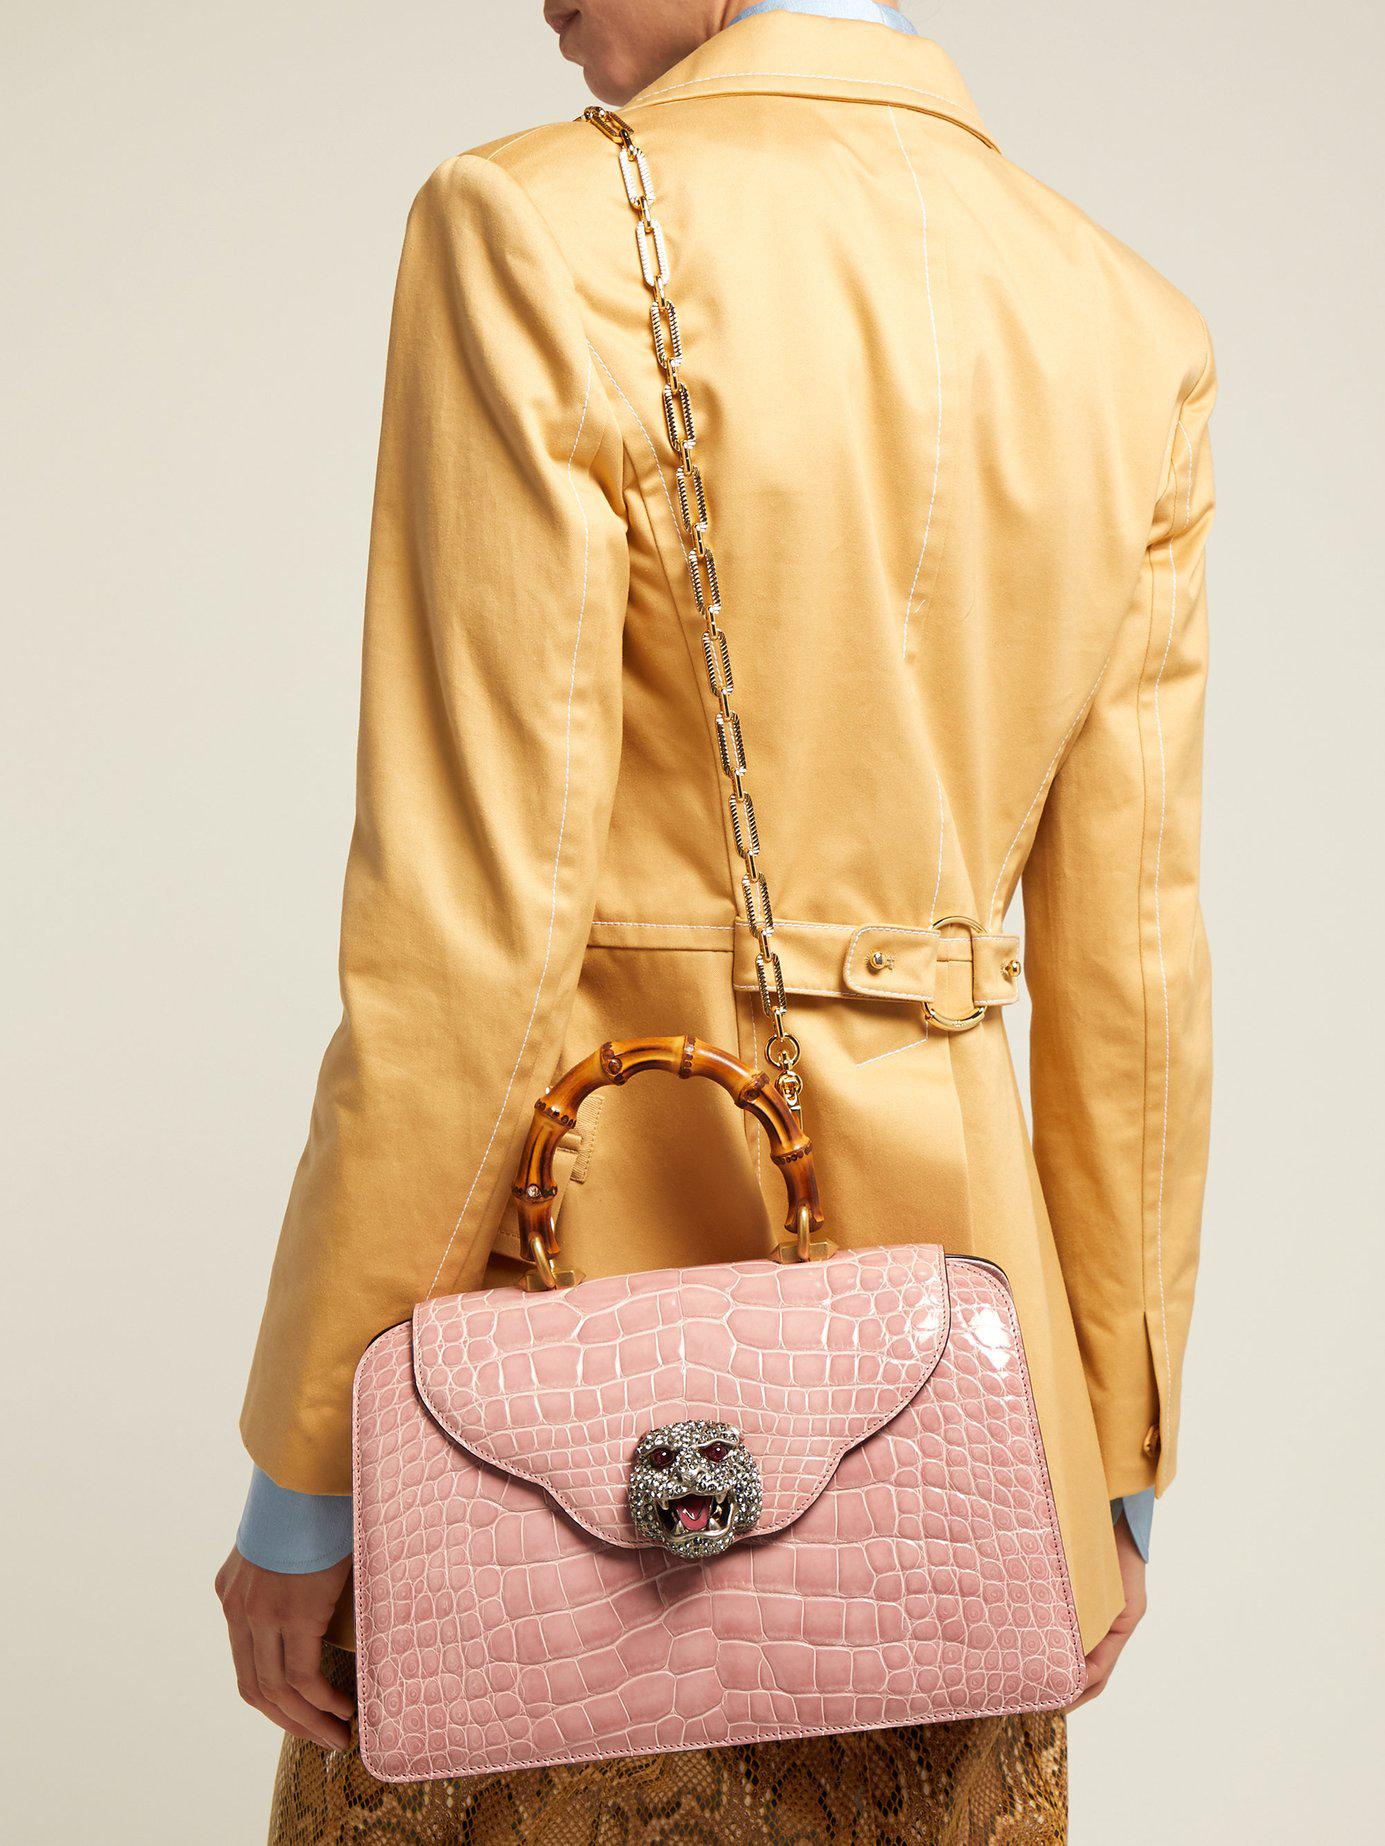 Gucci Thiara Bamboo Handle Crocodile Leather Bag in Light Pink (Pink) - Lyst